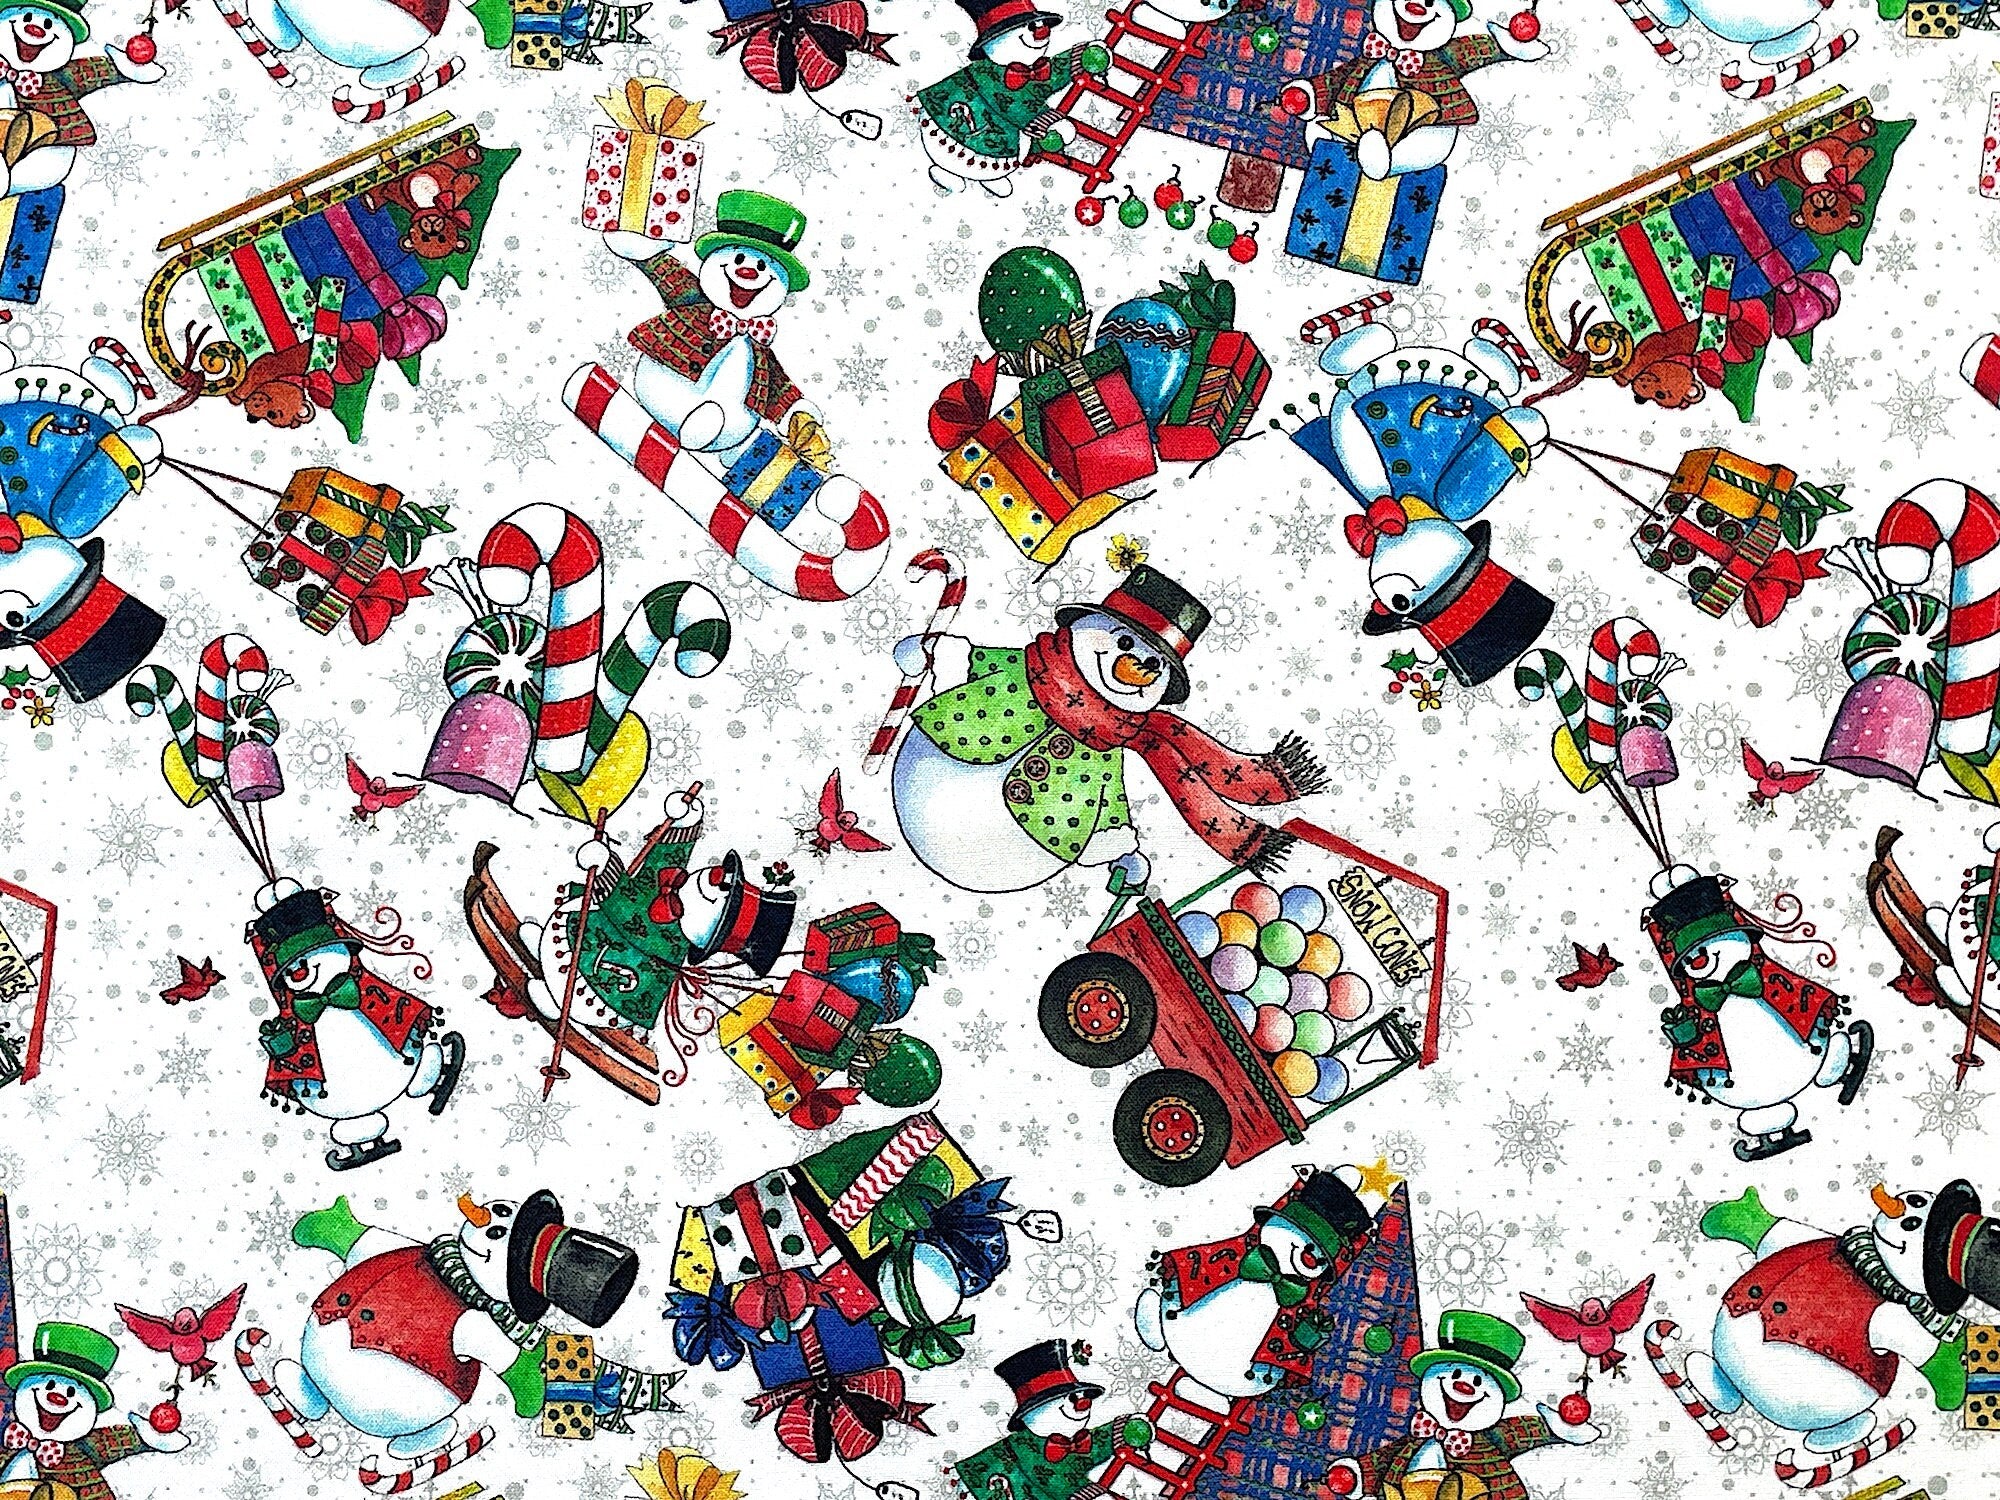 Close up of snowmen, trees, presents, candy canes, snowflakes and more.